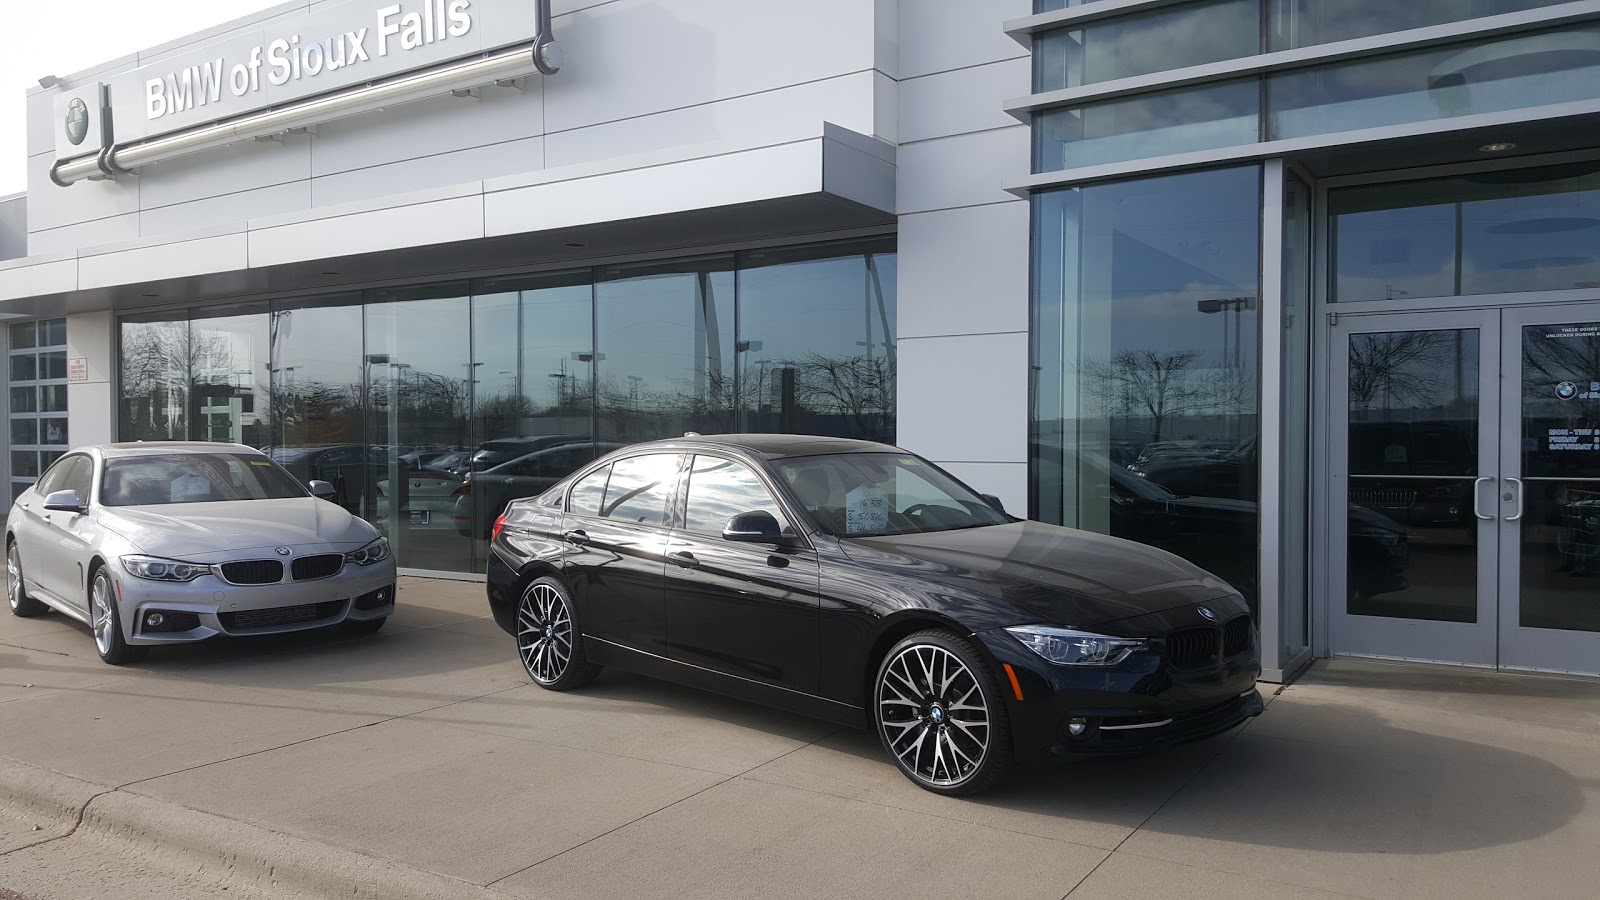 BMW of Sioux Falls